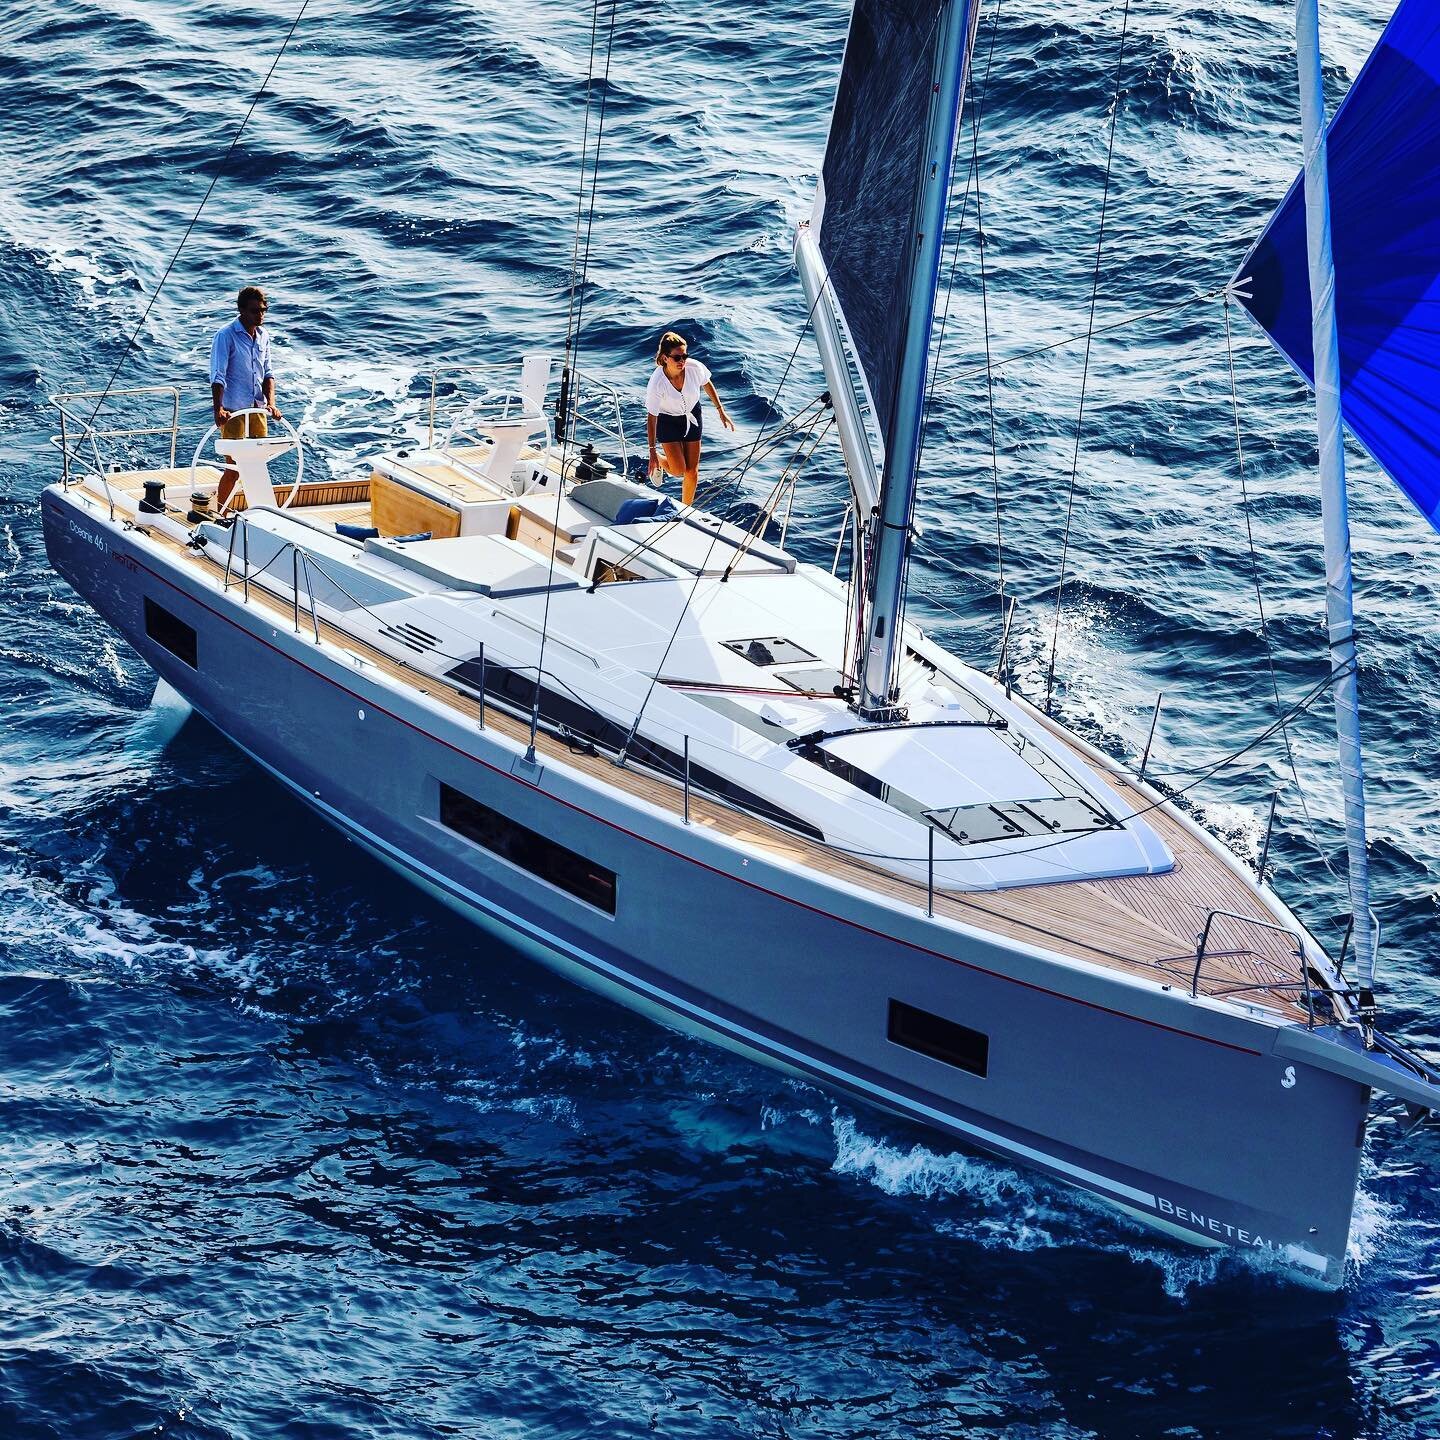 THE NEW OCEANIS 46.1
.
A year after the Oceanis 51.1 phenomenon, Beneteau is still creating a small revolution in this 30-year-old line.
.
📱🖥 Read the full review here http://bit.ly/Skipper20_Oceanis46